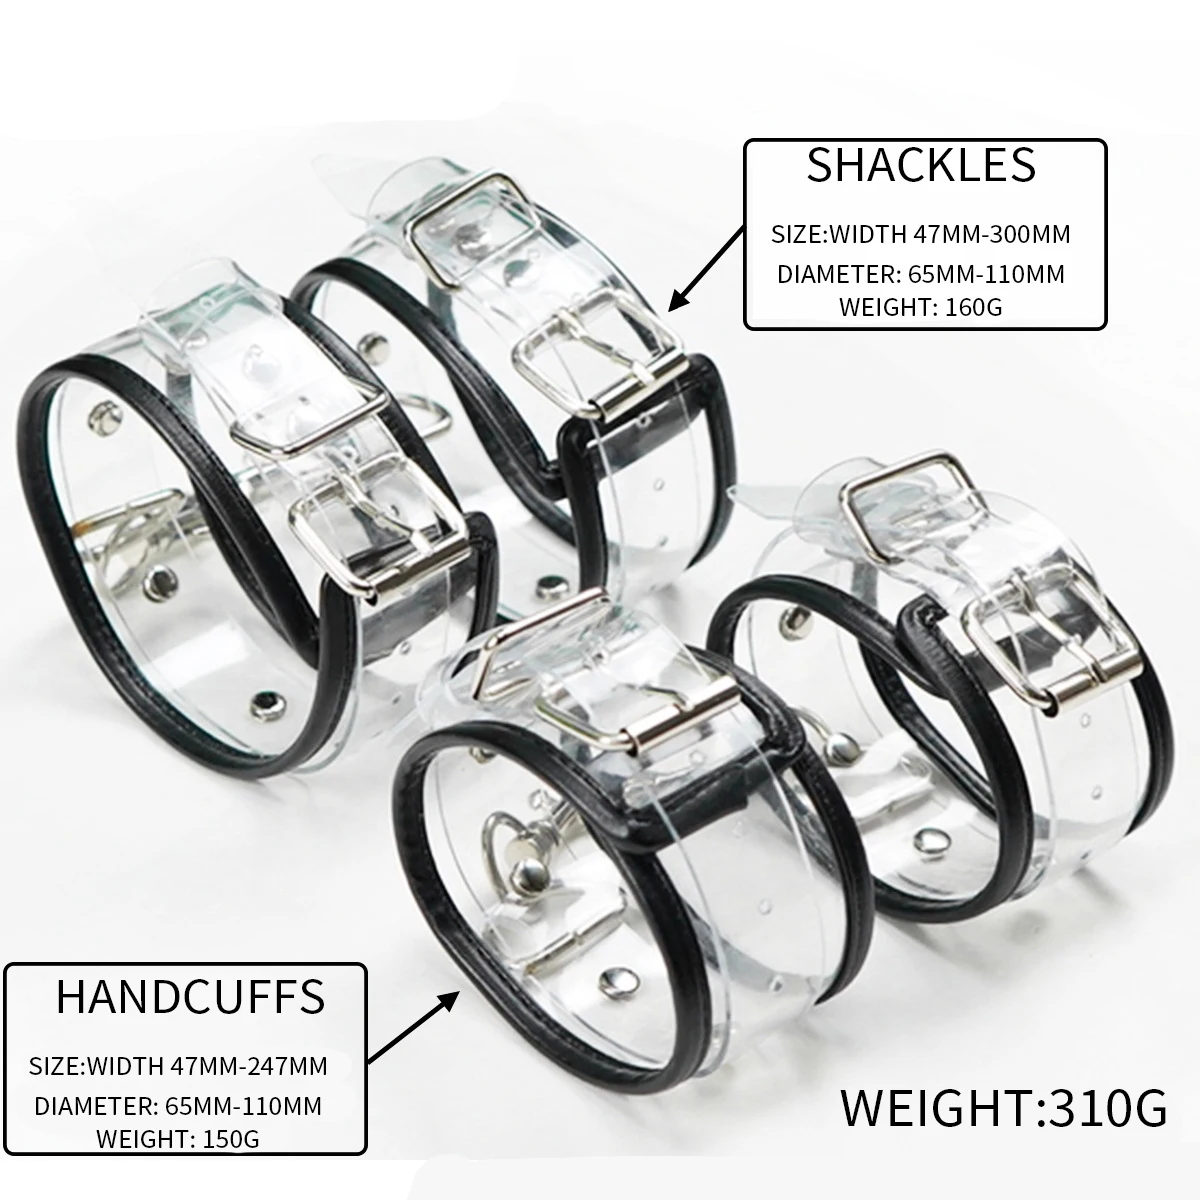 

Sexy Adjustable Clear Shackles Handcuffs set Ankle Cuff Restraints BDSM Bondage Toy Soft Plastic Sex Tied Up Exotic Accessories